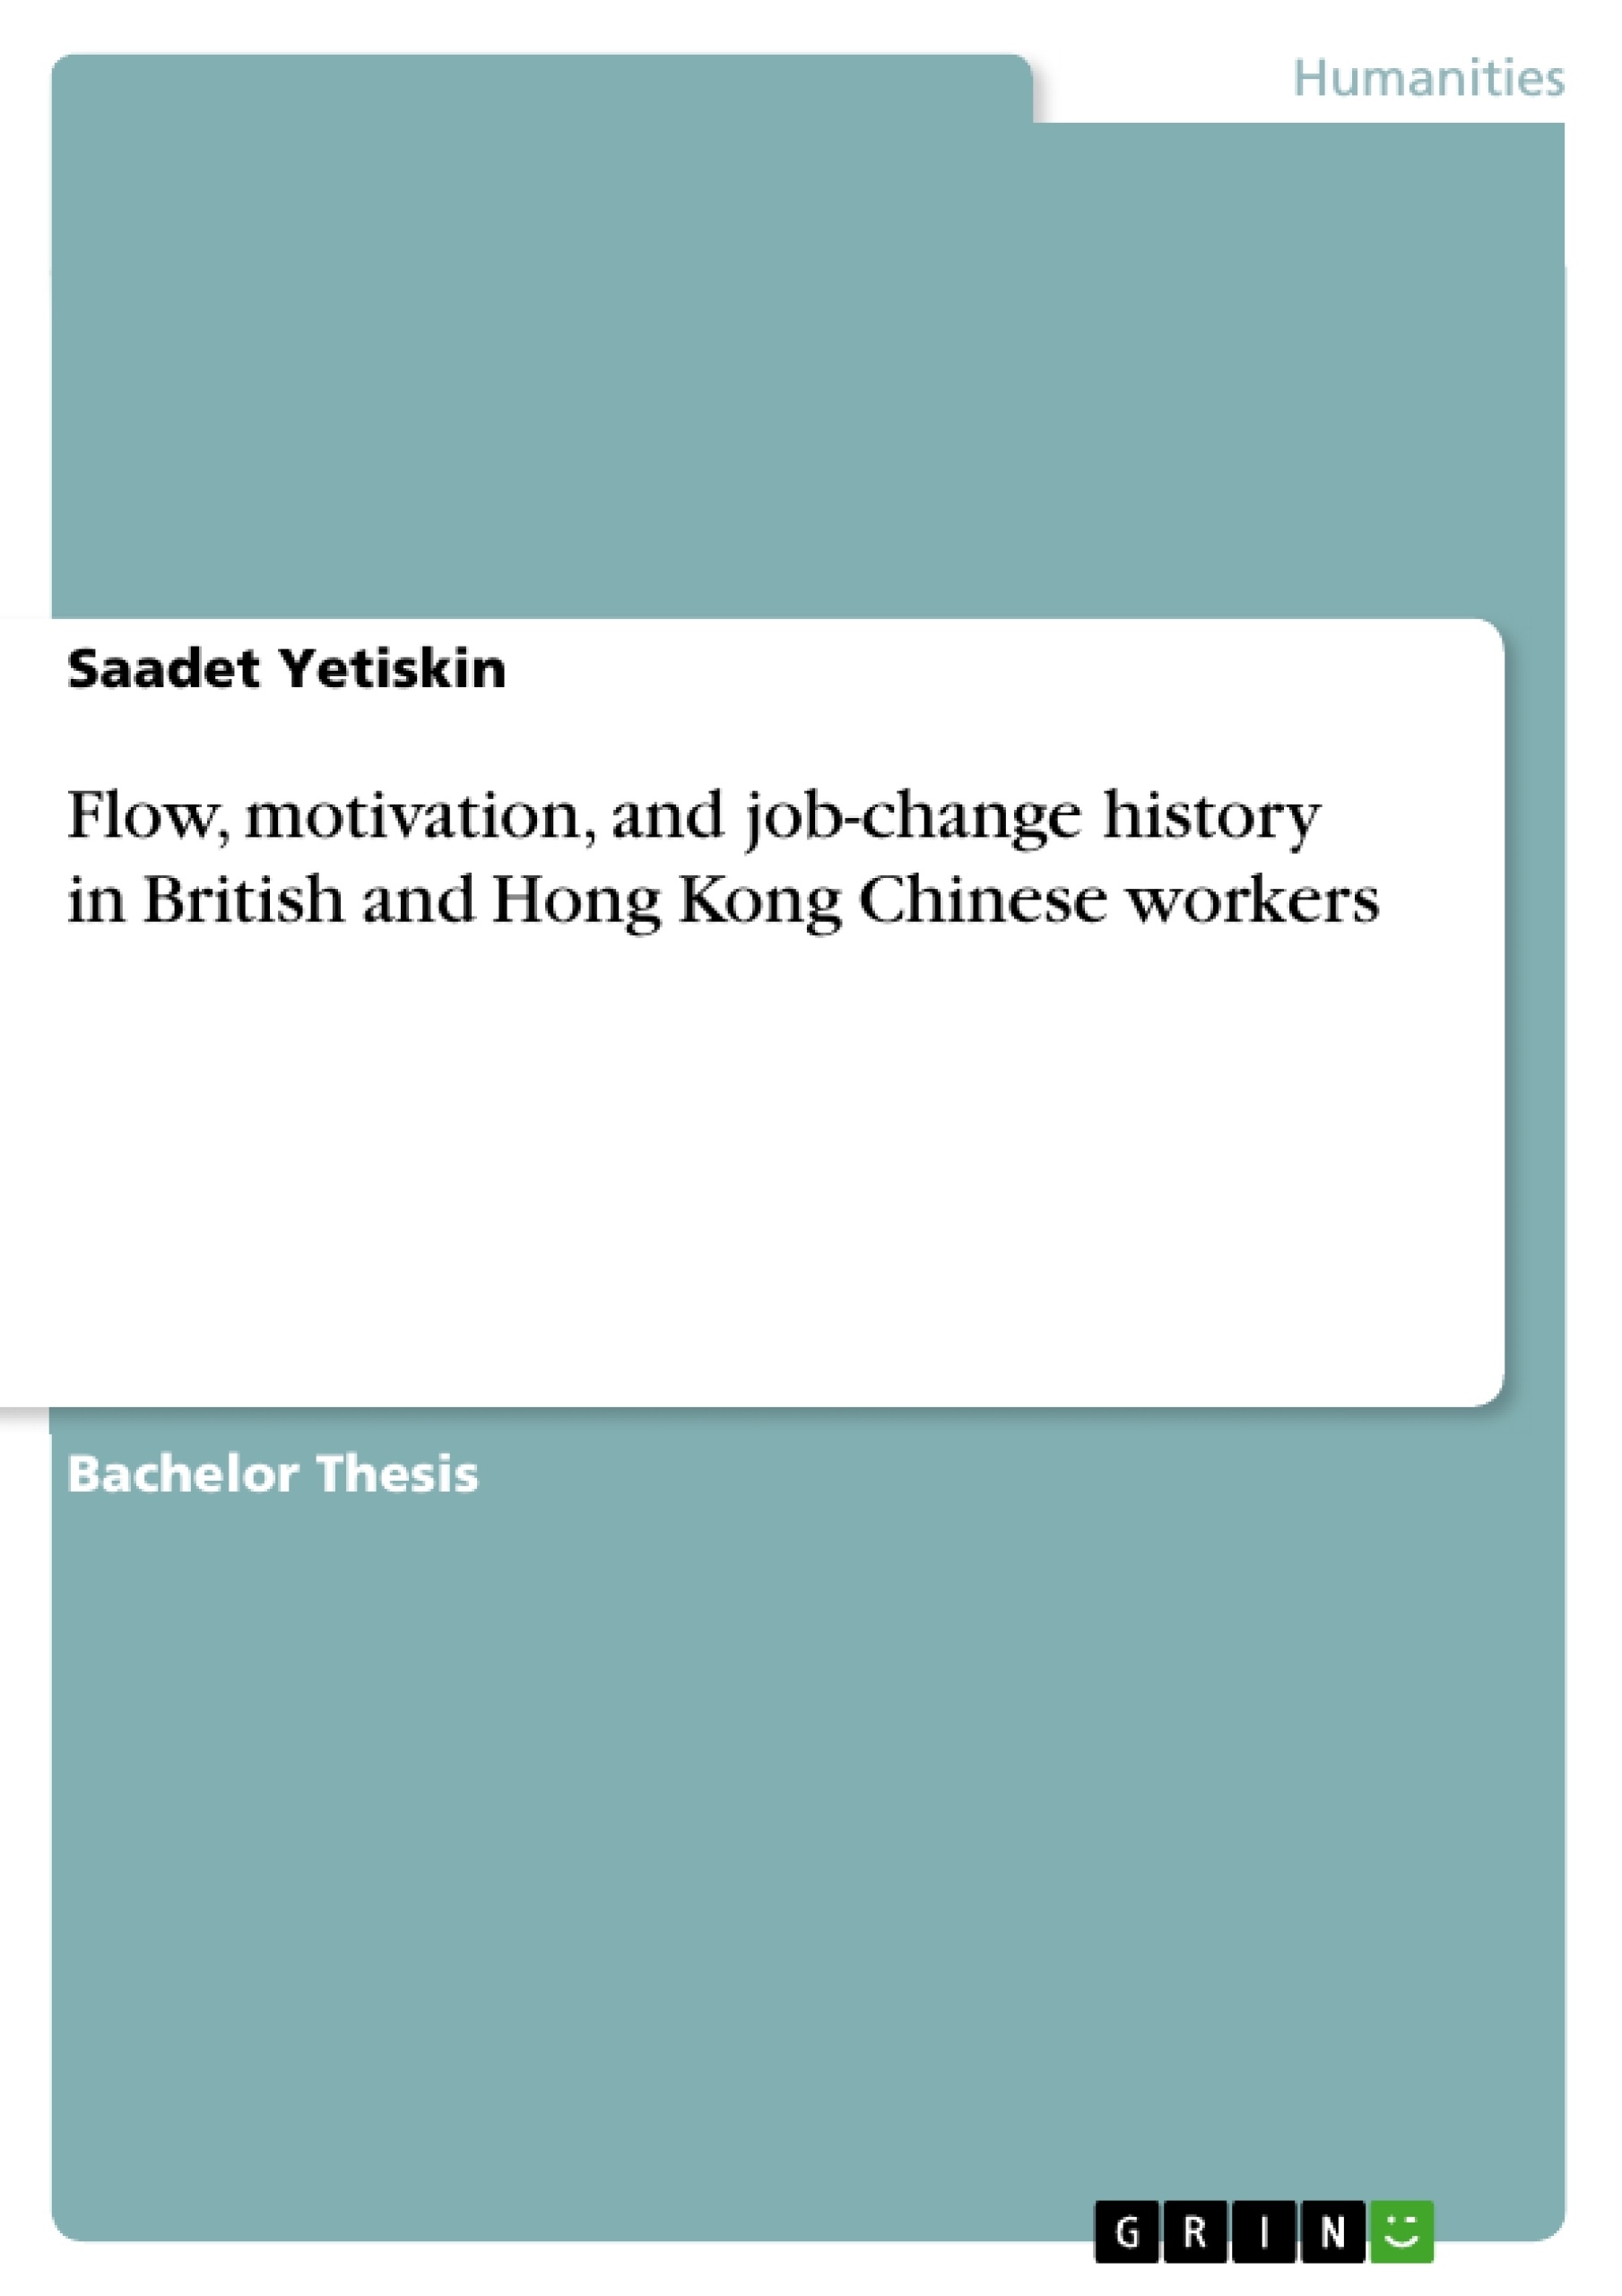 Título: Flow, motivation, and job-change history in British and Hong Kong Chinese workers